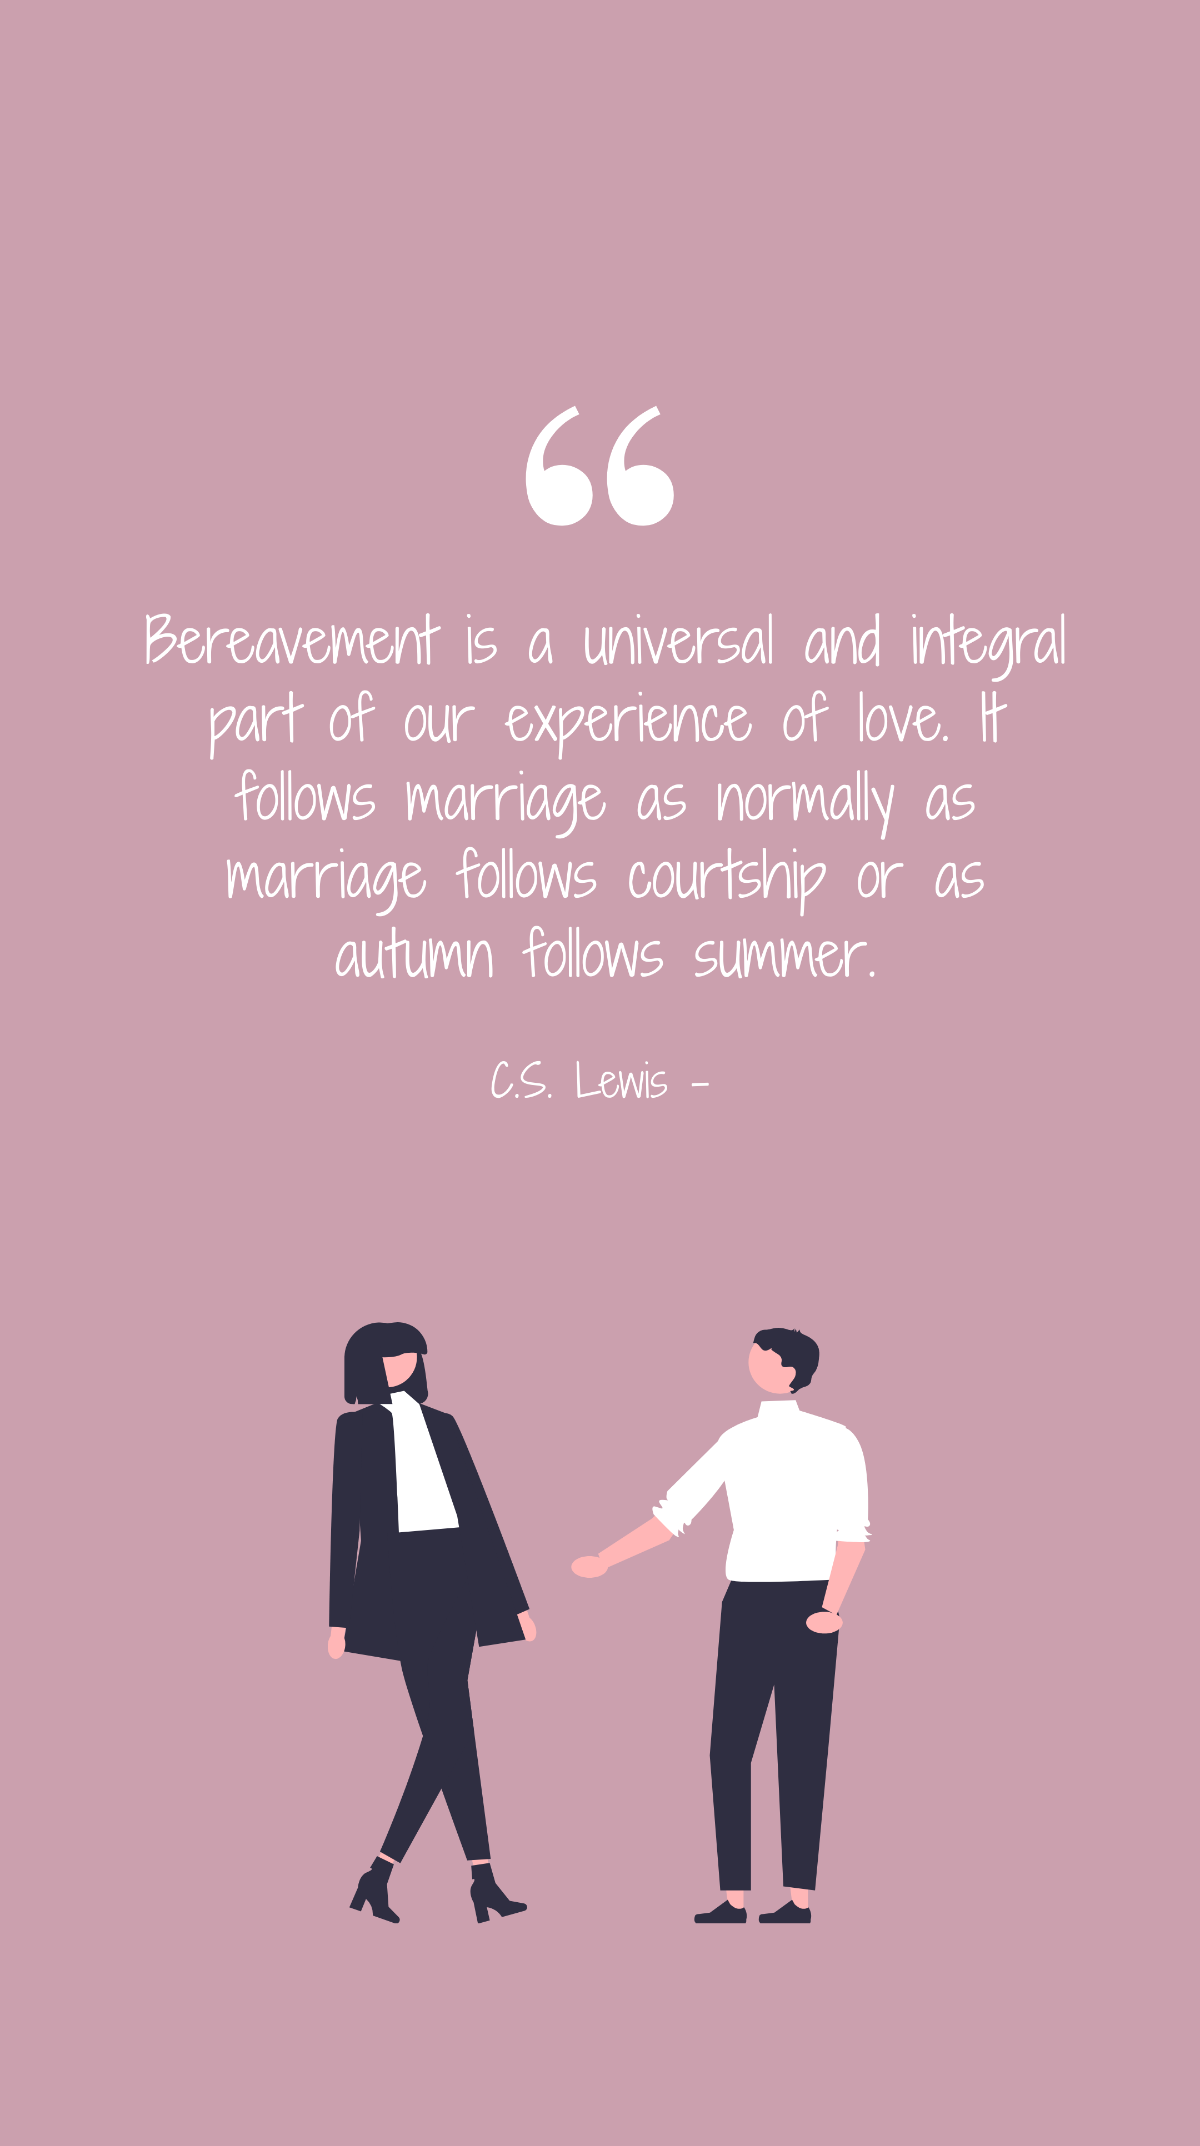 C.S. Lewis - Bereavement is a universal and integral part of our experience of love. It follows marriage as normally as marriage follows courtship or as autumn follows summer.